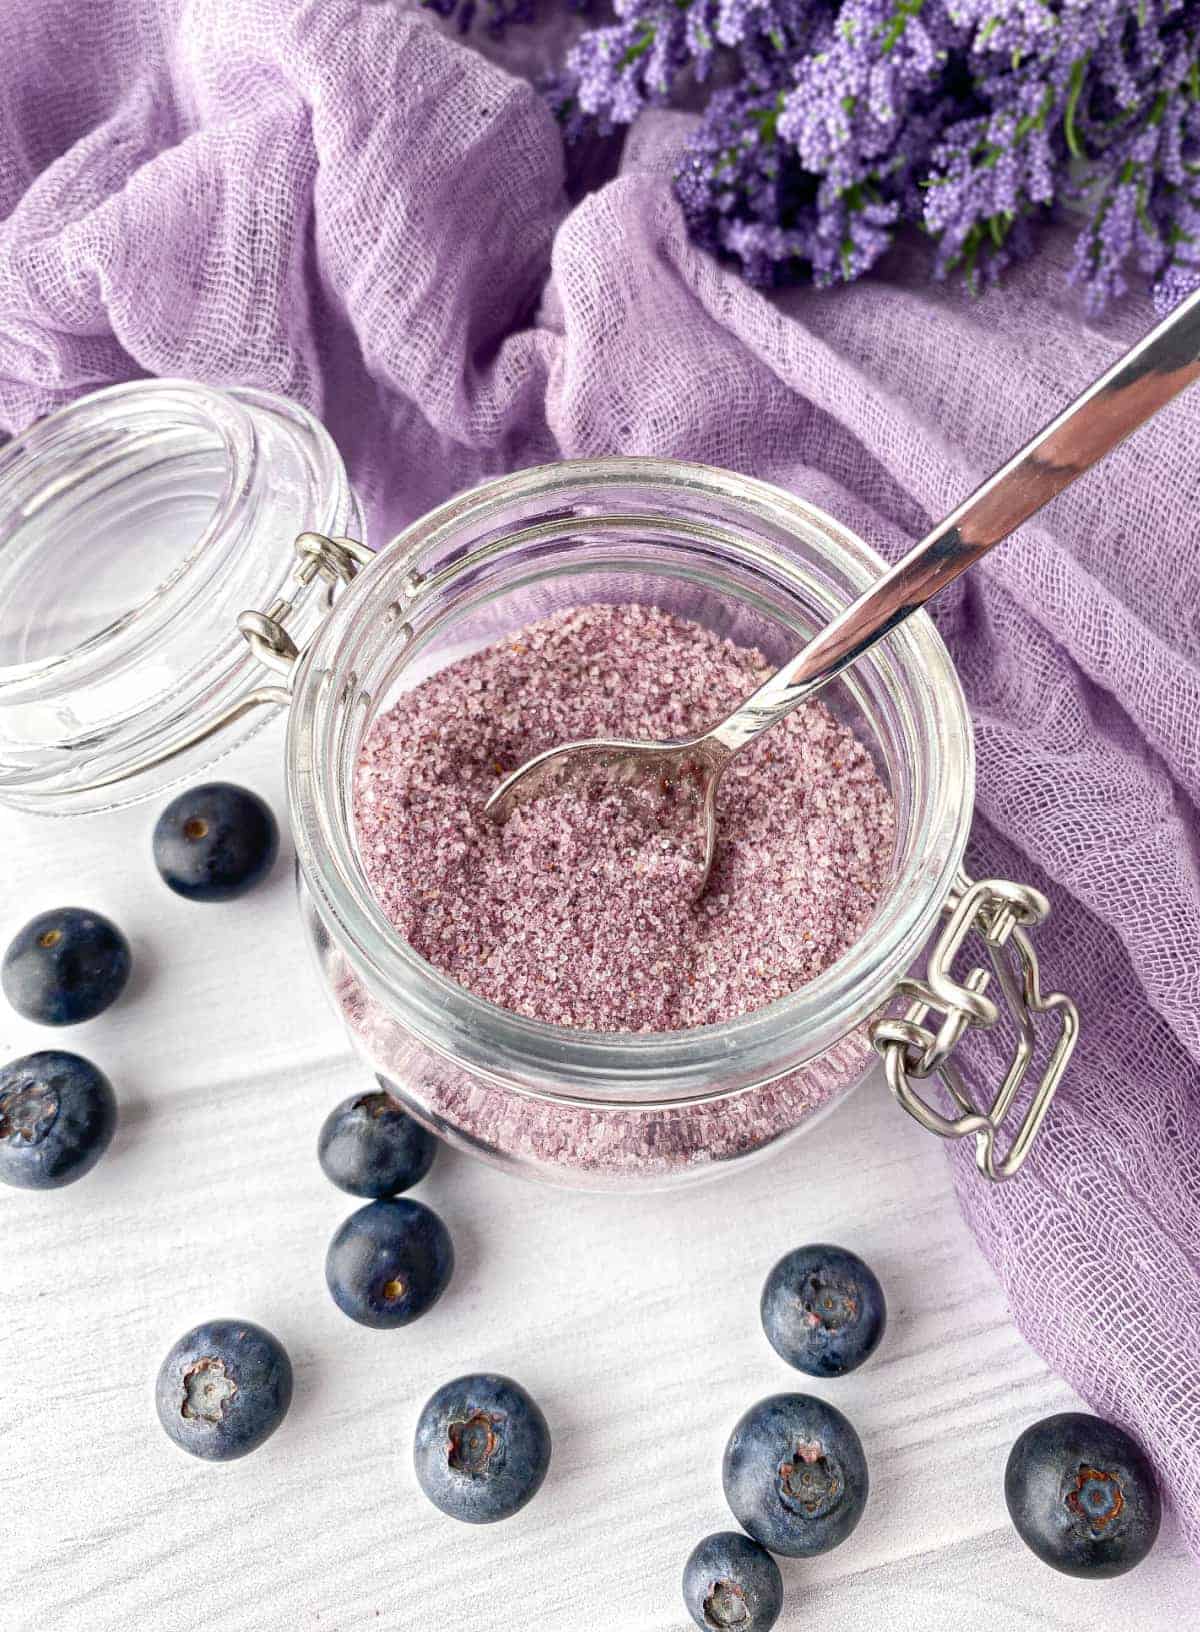 Jar of Blueberry Sugar with fresh blueberries scattered nearby.